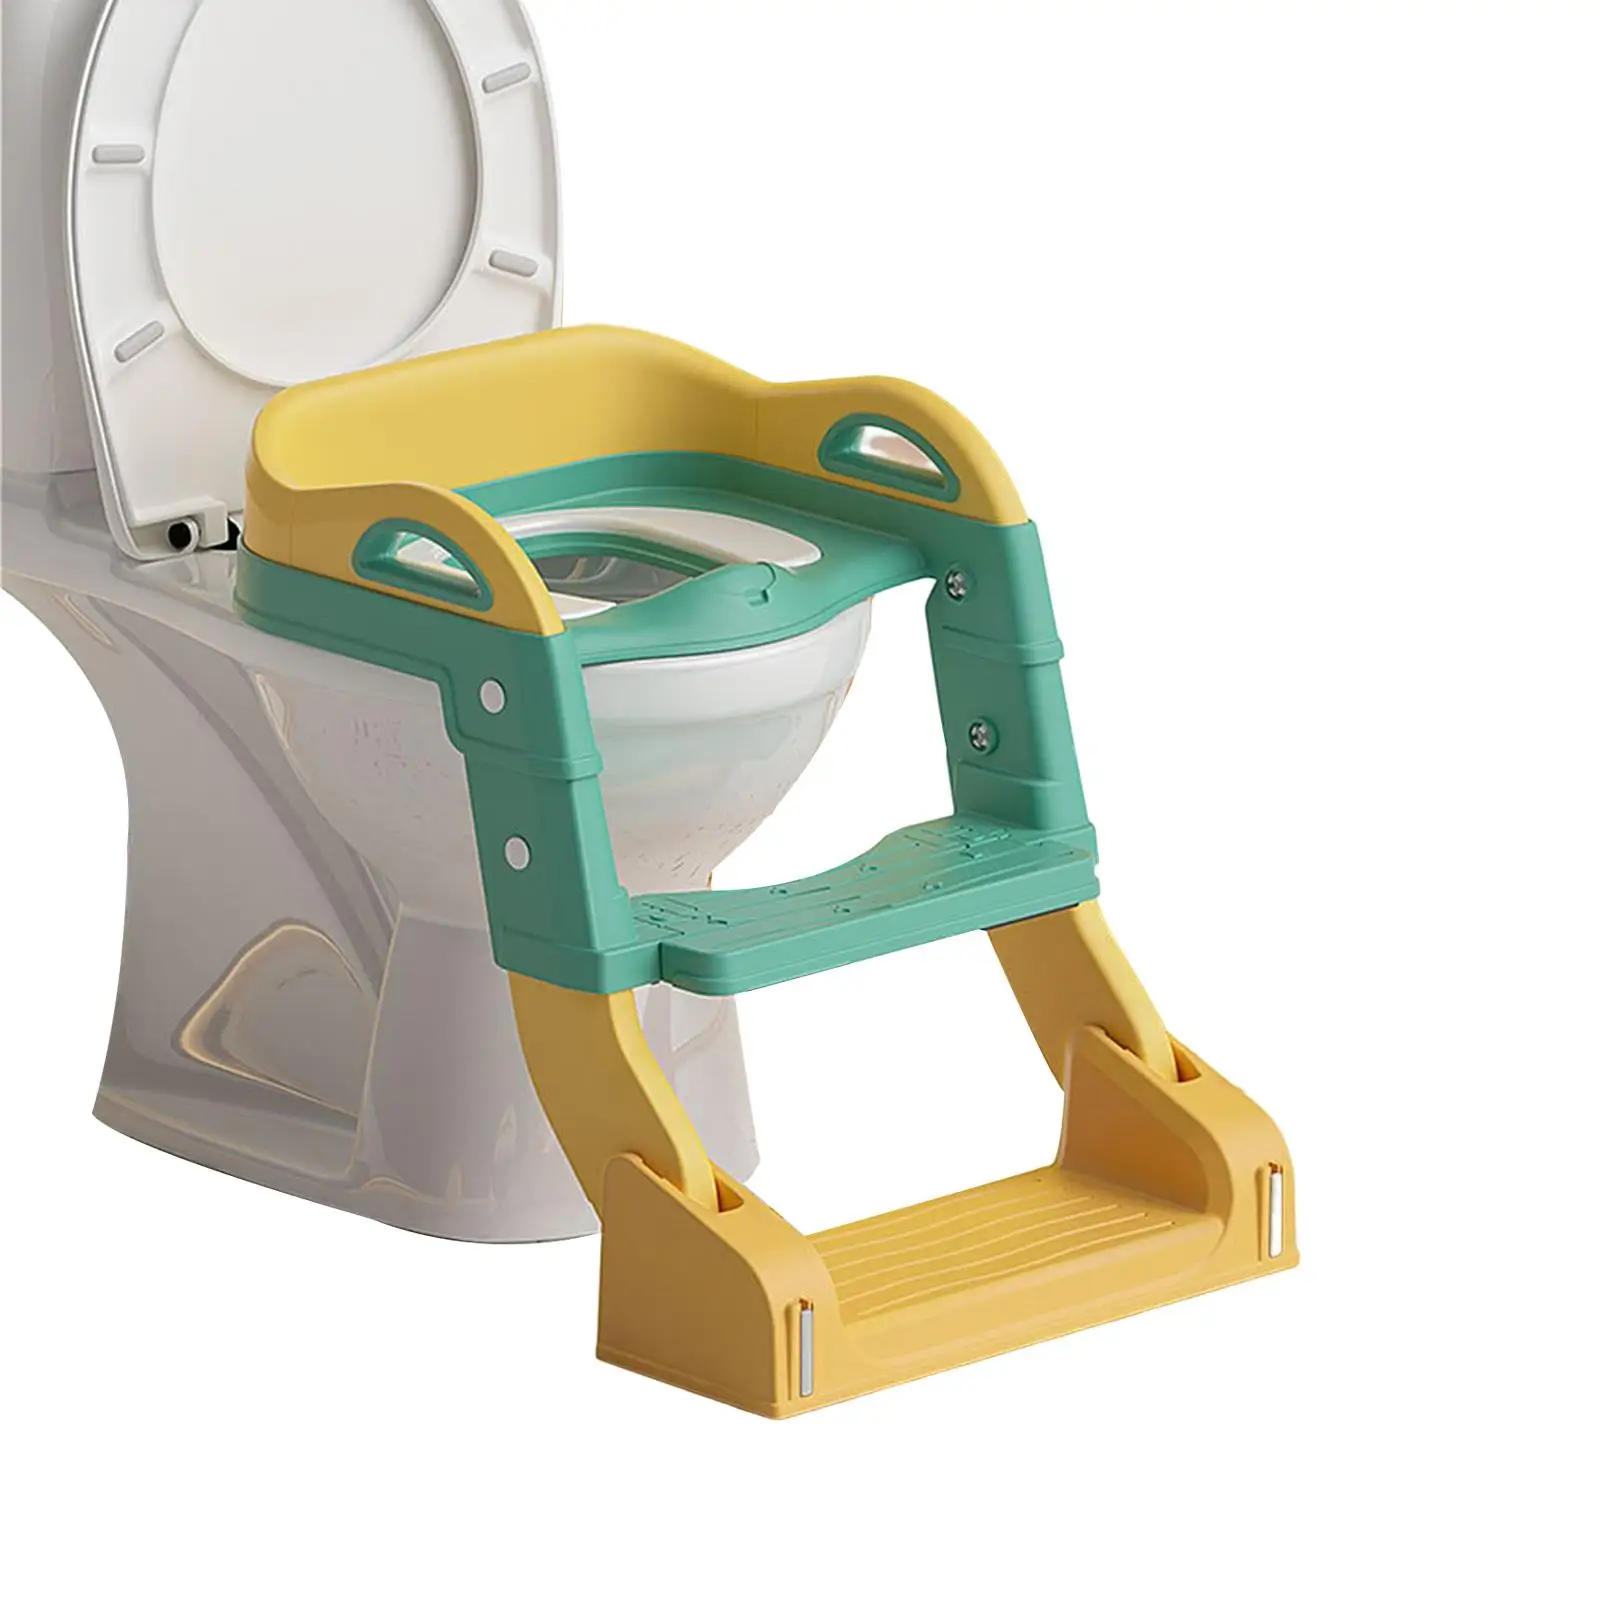 Kids Toilet Training Seat Step Stool Ladder Baby Infant Potty Foldable Soft Cushion Waterproof Portable Toilet Trainer Seat